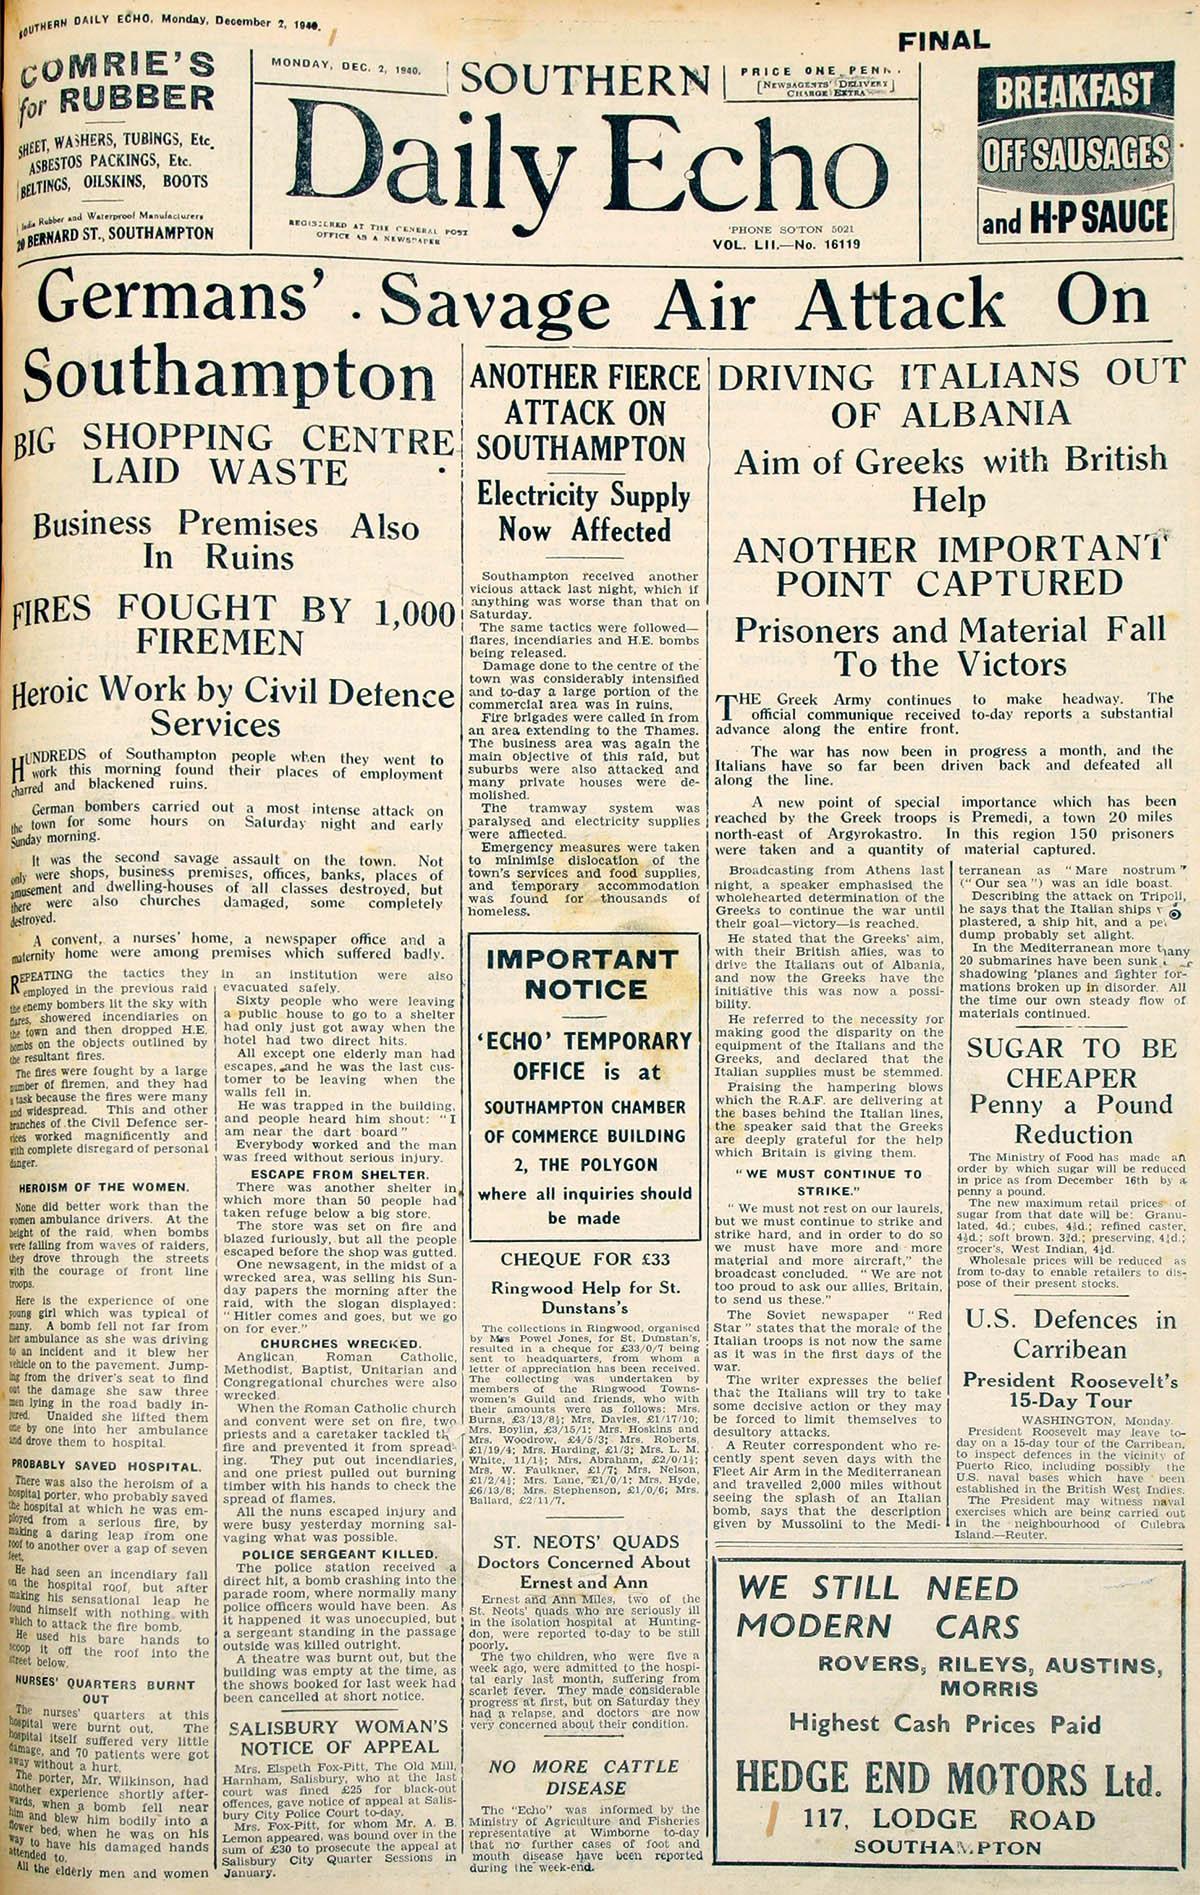 The Daily Echo front page following the Southampton Blitz.